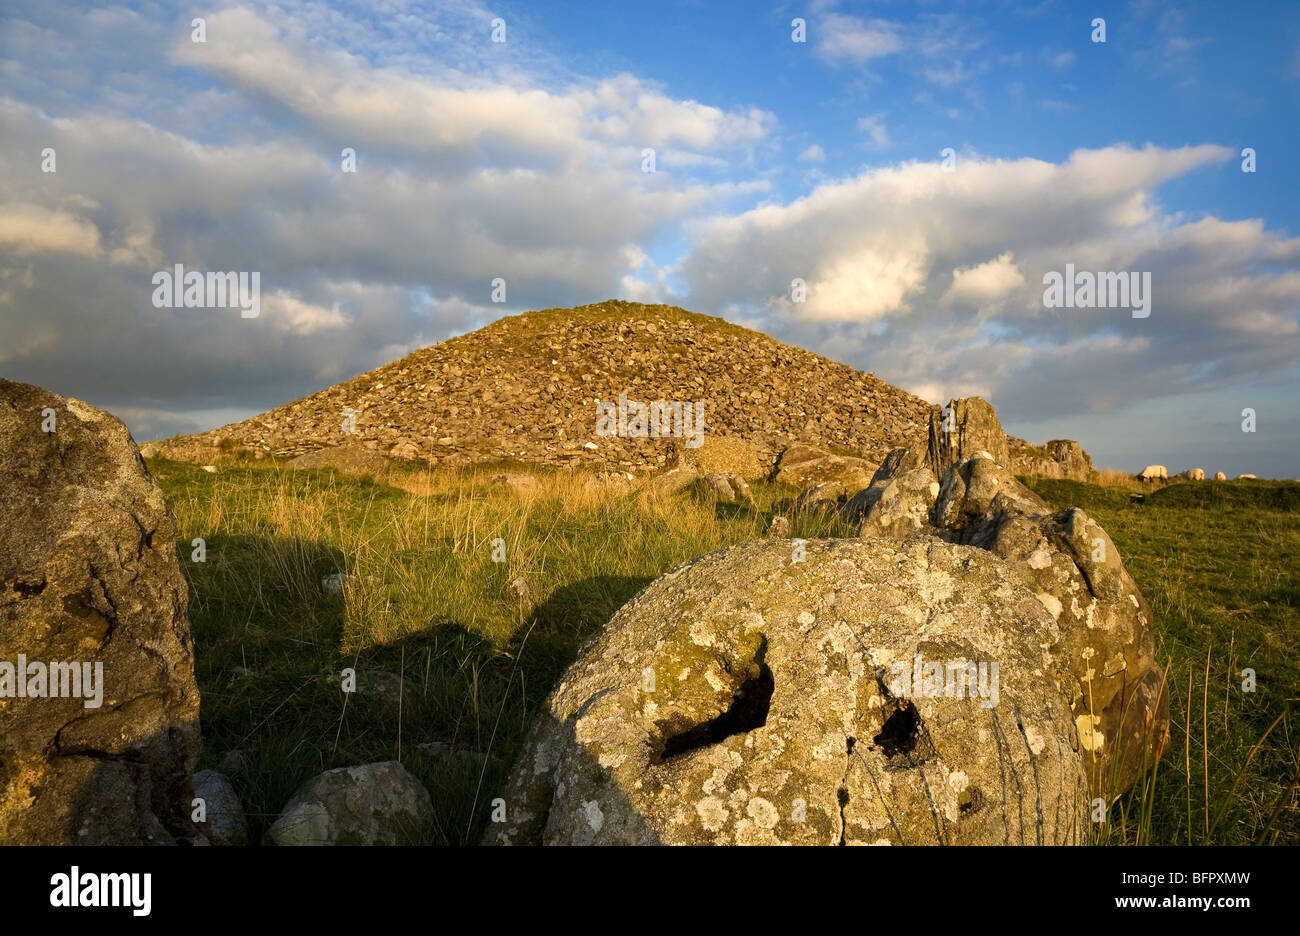 Cairn T Ganggrab, Loughcrew Meagalithic Site, Slieve Na Calliagh, in der Nähe von Oldcastle, County Meath, Irland Stockfoto